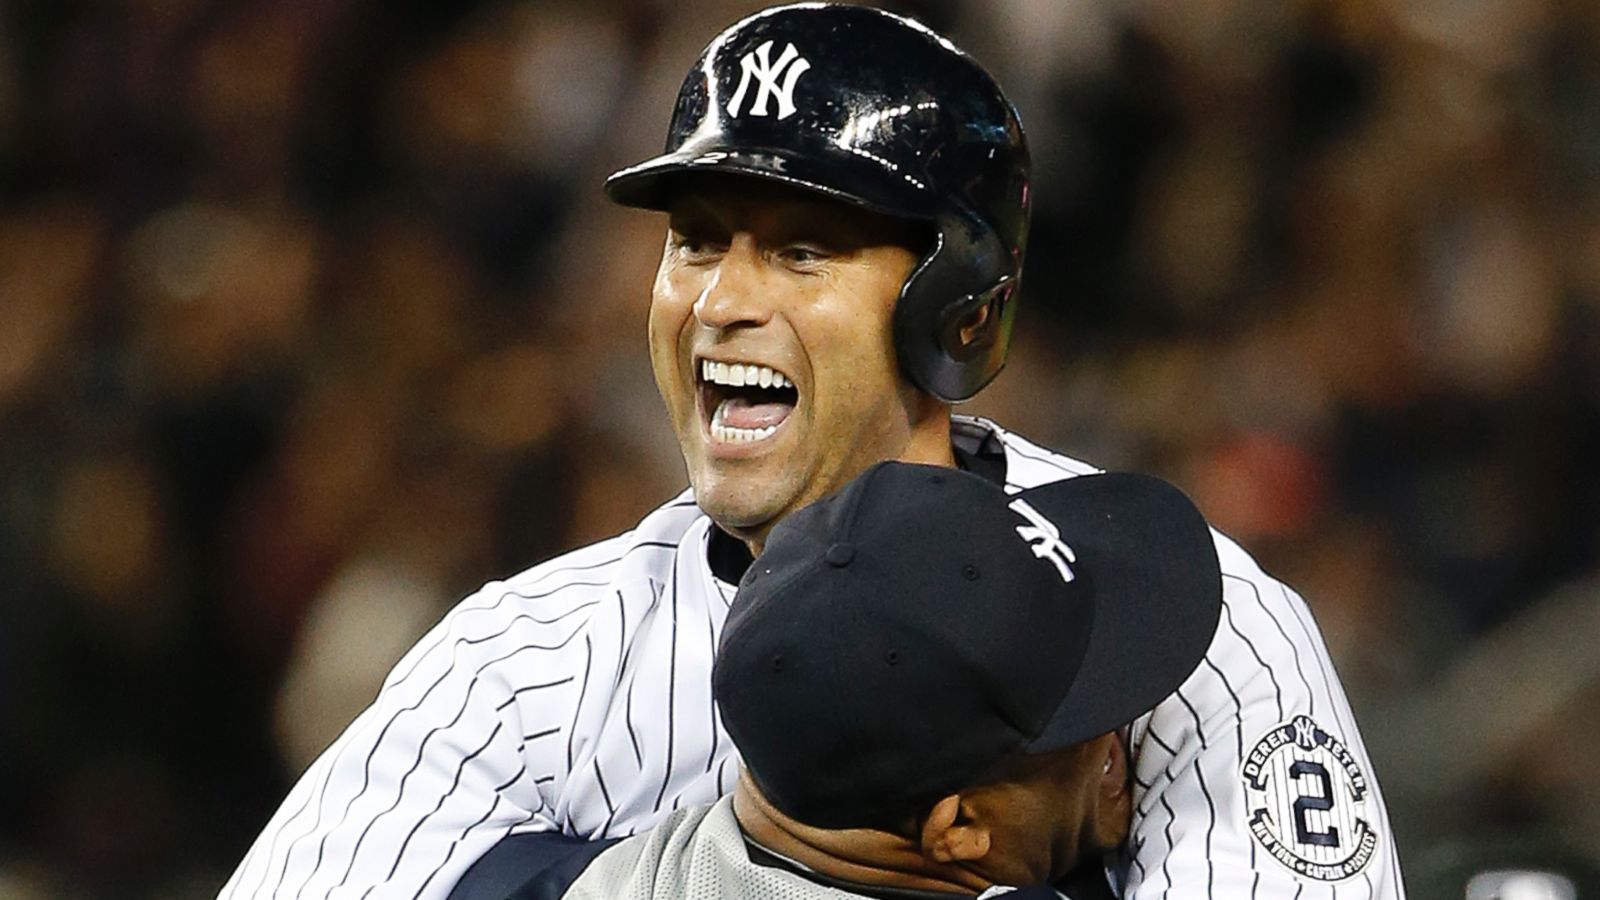 Business as usual for Derek Jeter in final home opener